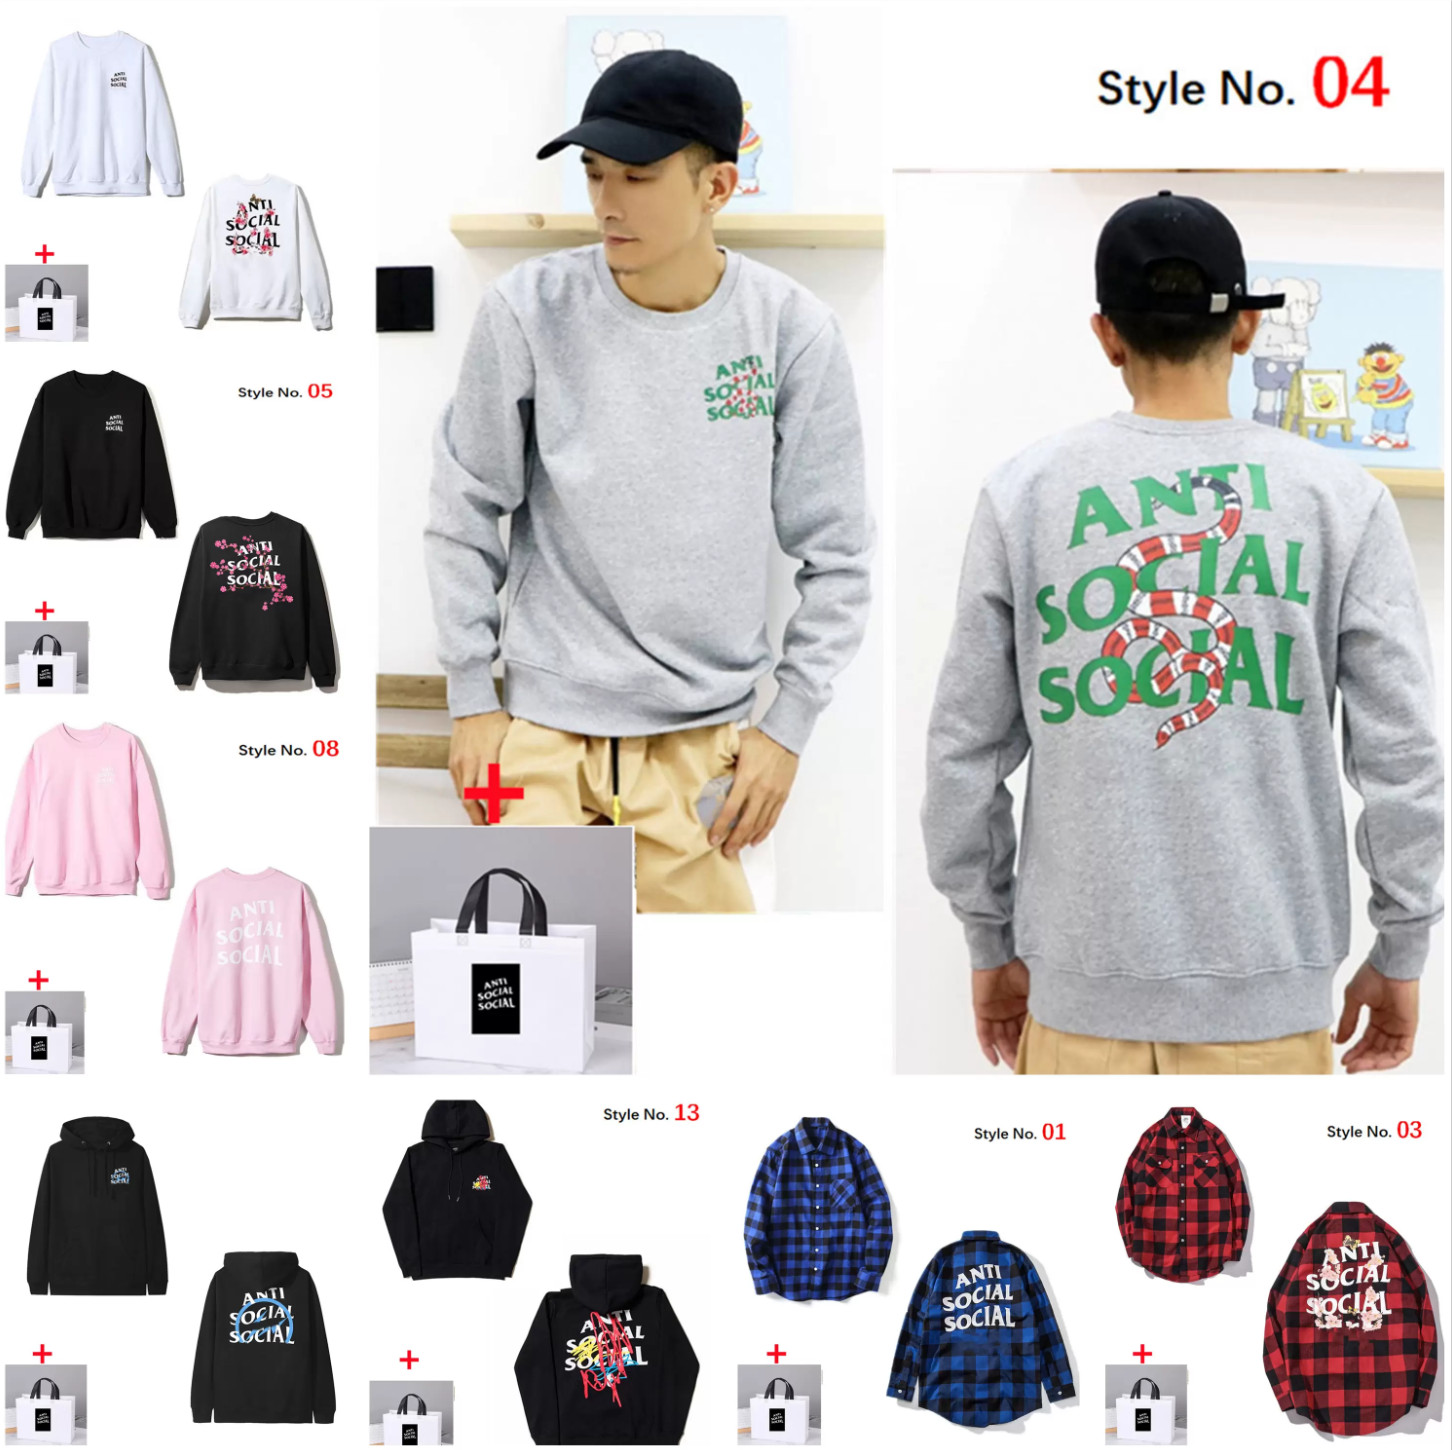 

European Men Sweater Women Sweatshirts High Quality Hoodie Cotton Tops with Labels Hip Hop Letters Printed Long Sleeves Bring tote bag, 1pcs button